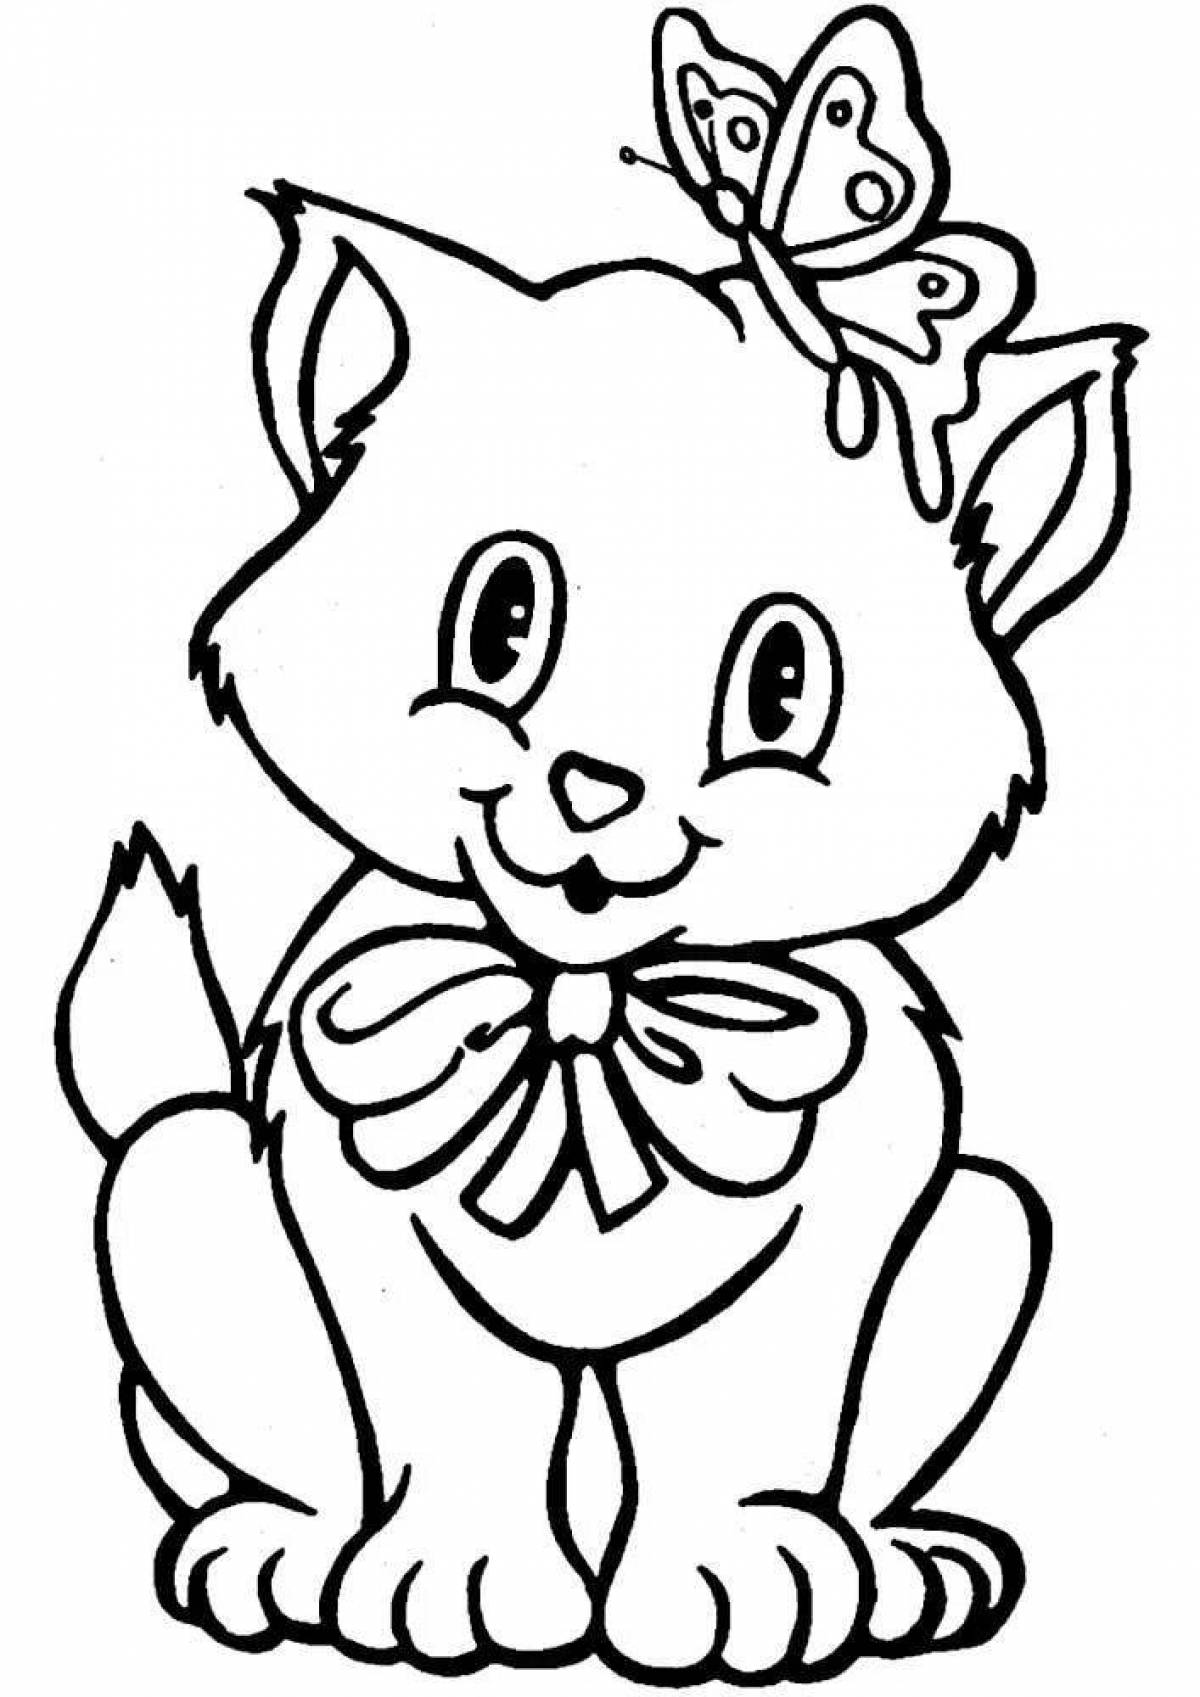 Agile coloring page kitty with a bow